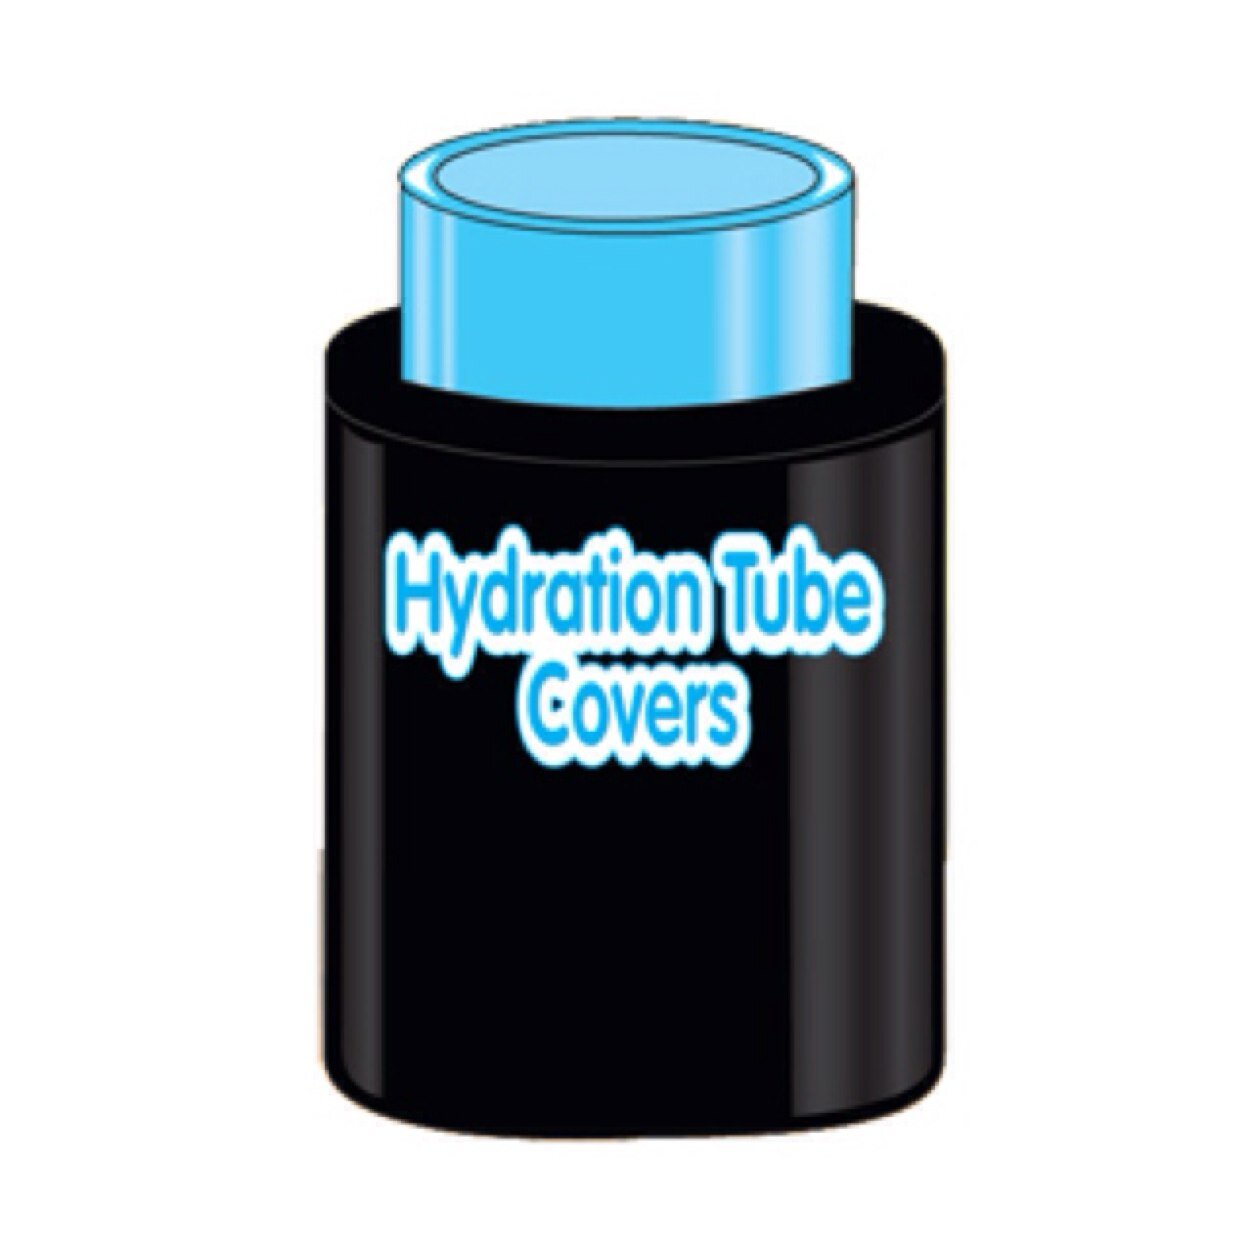 Supplying Hydration Accessories for those thirsty Adventurers!
    ☞Instagram: hydration_tube_covers
☞Snapchat: HydrationCovers
☞Facebook: Hydration Tube Covers